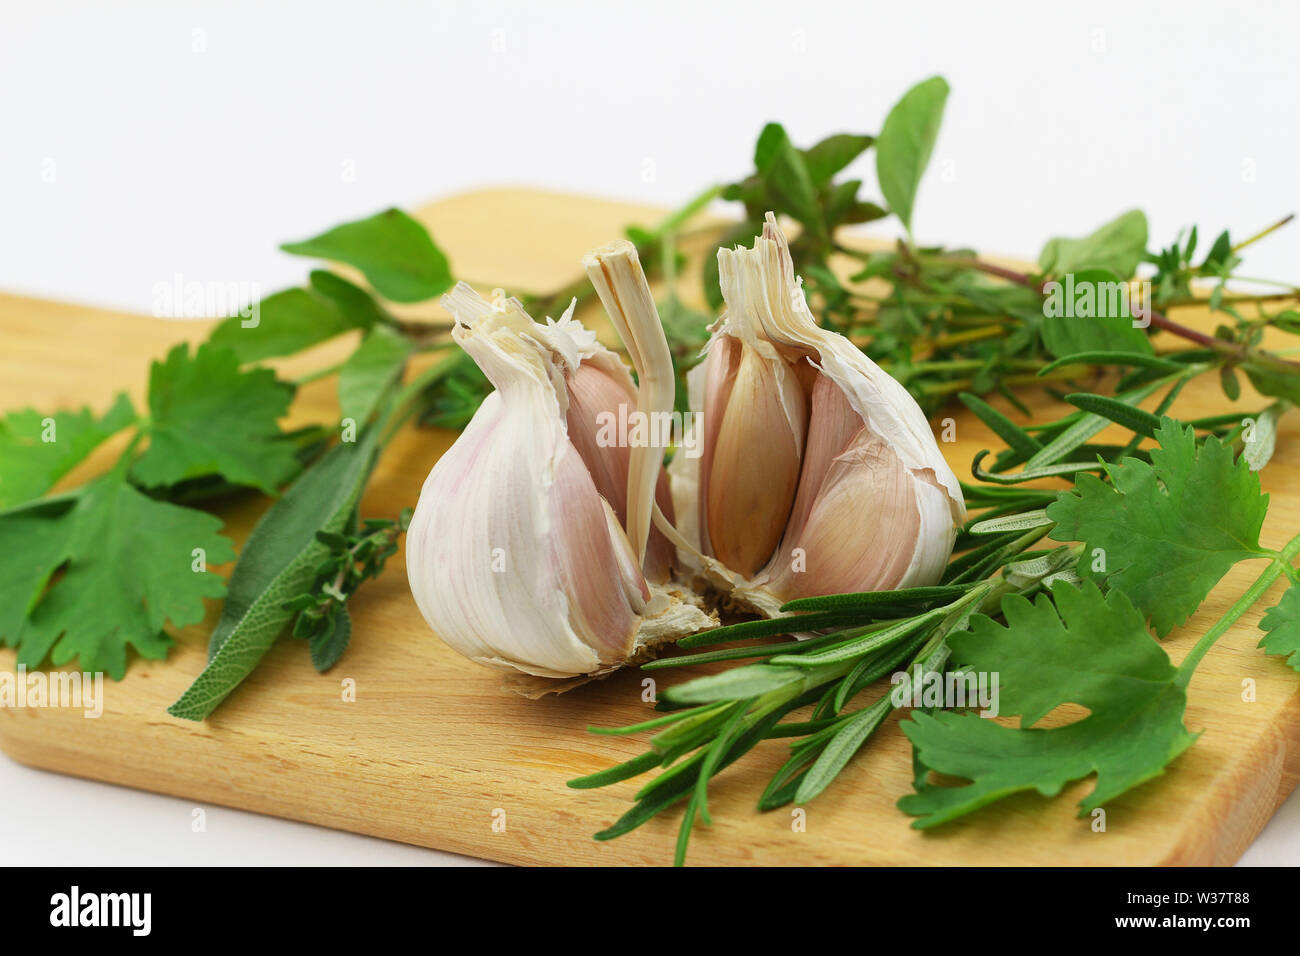 Closeup of garlic cloves and bunch of fresh herbs on wooden board Stock Photo